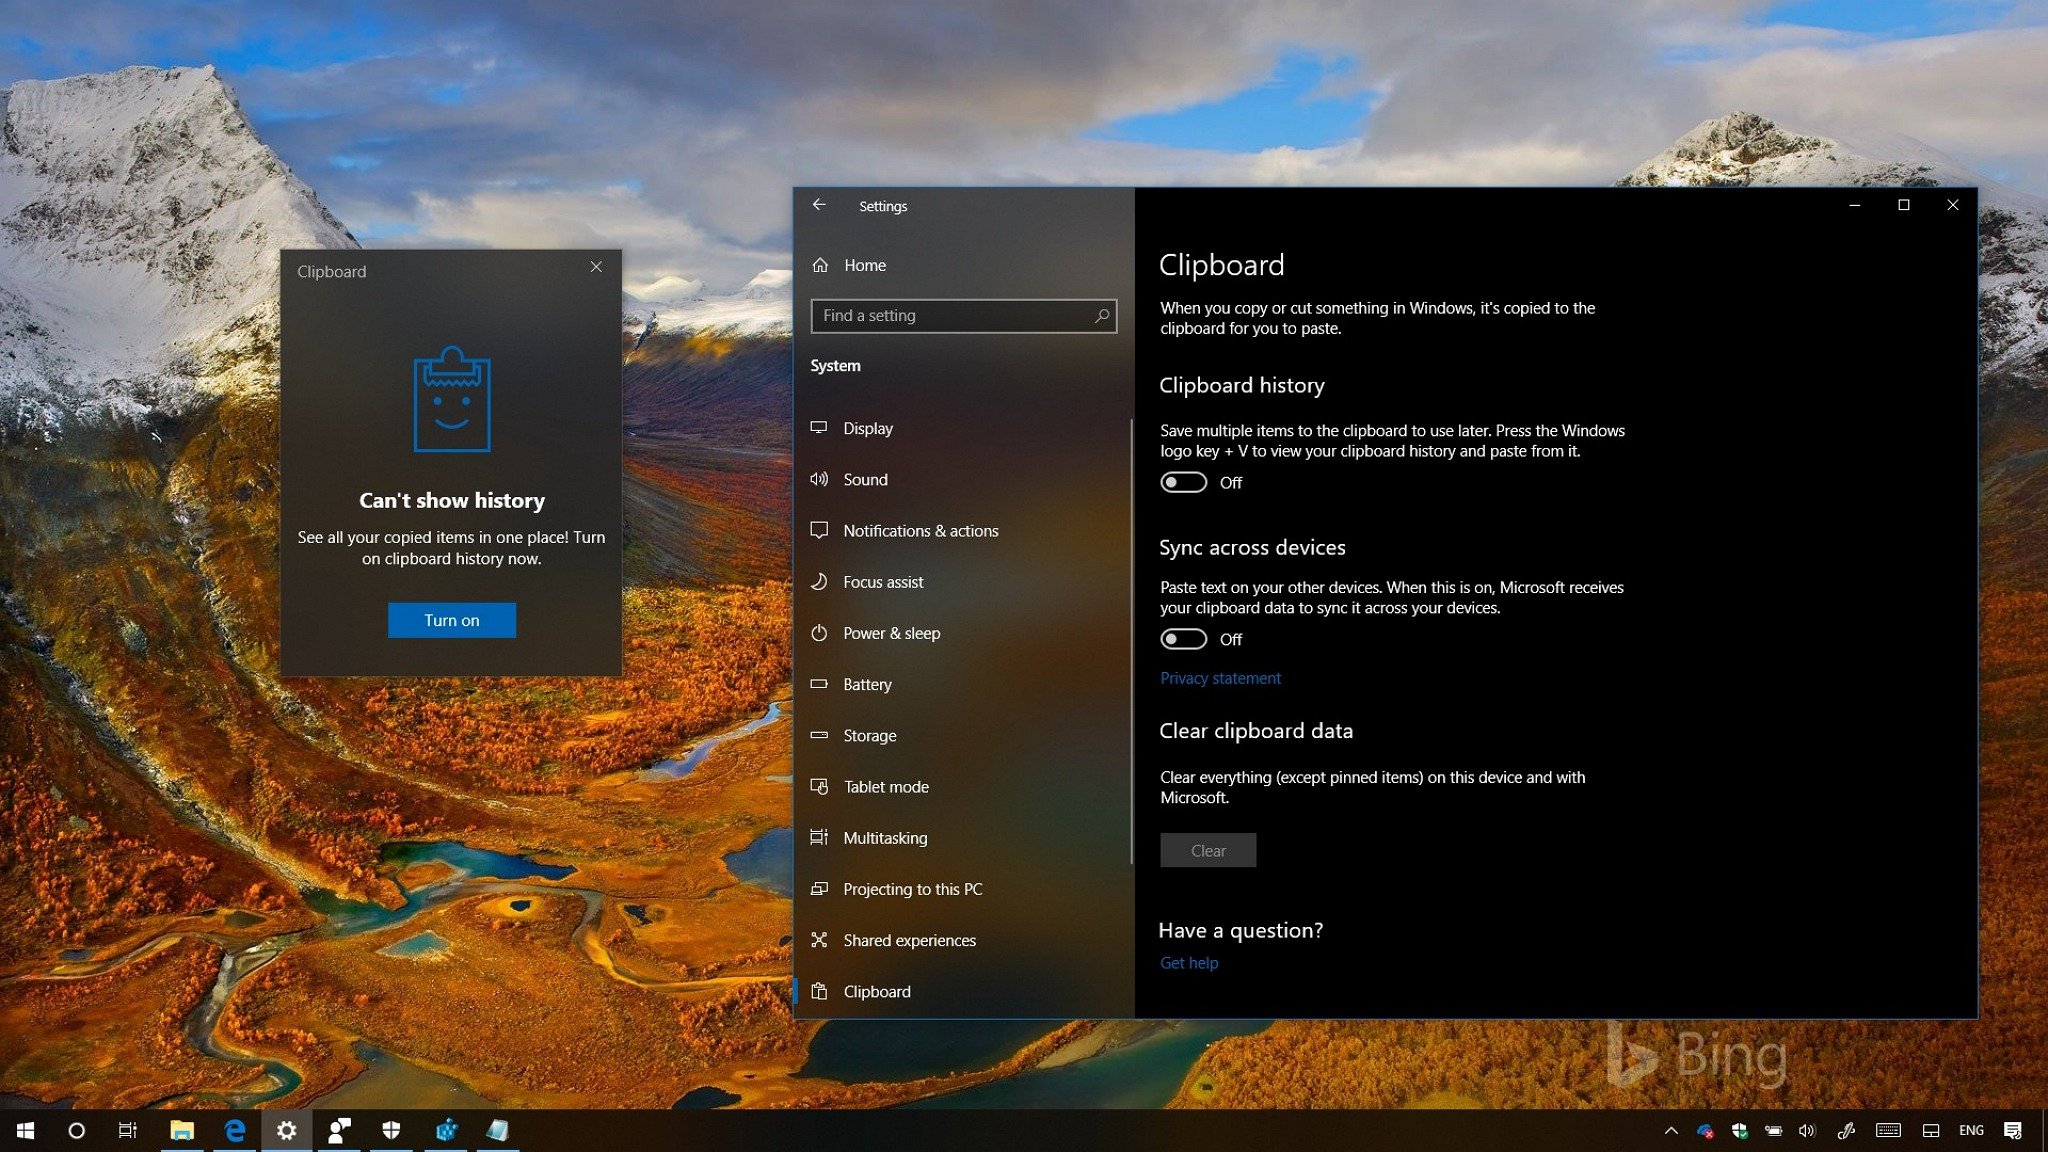 https://www.windowscentral.com/sites/wpcentral.com/files/styles/large/public/field/image/2018/10/windows-10-1809-new-features.jpg?itok=U52iBxFF